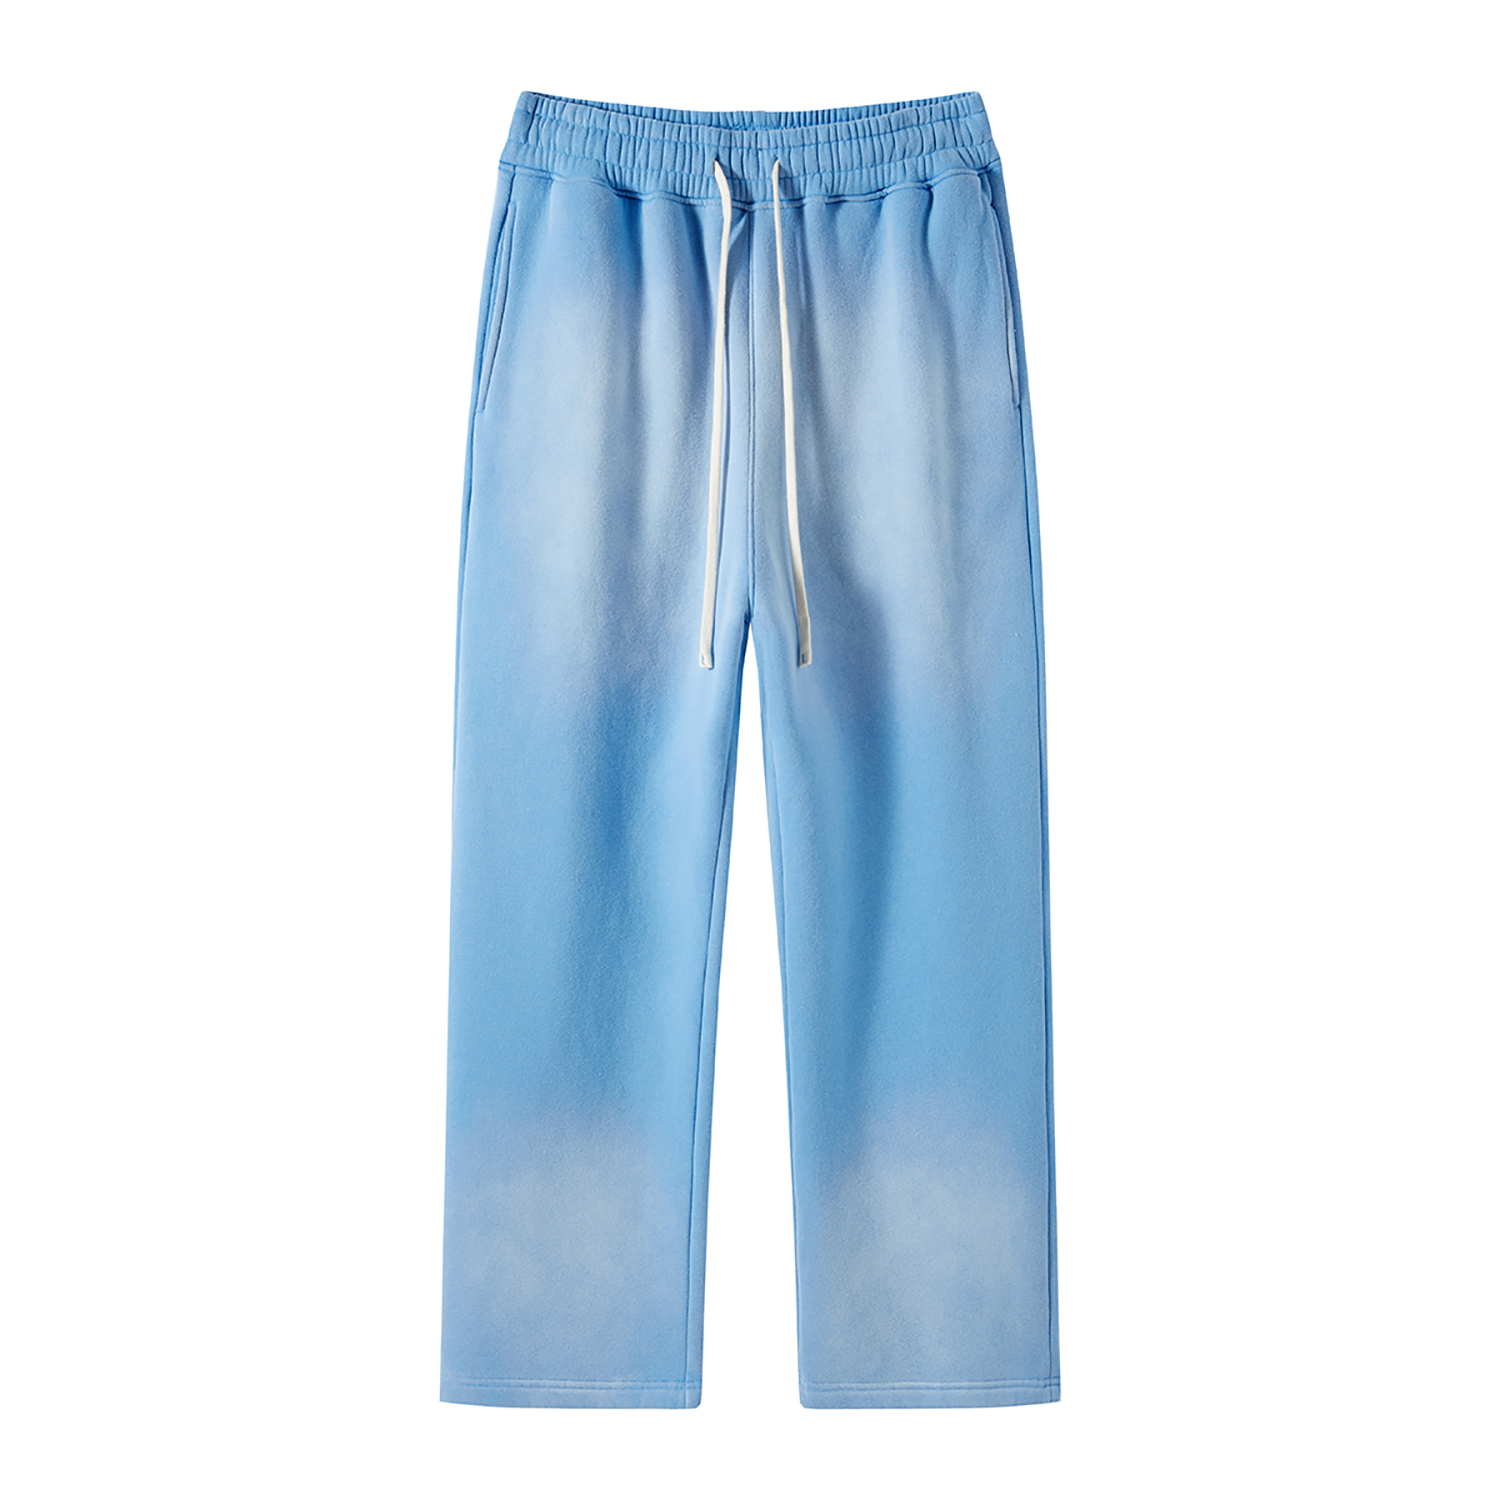 Streetwear Colored Gradient Washed Effect Pants - Dropshipping-20